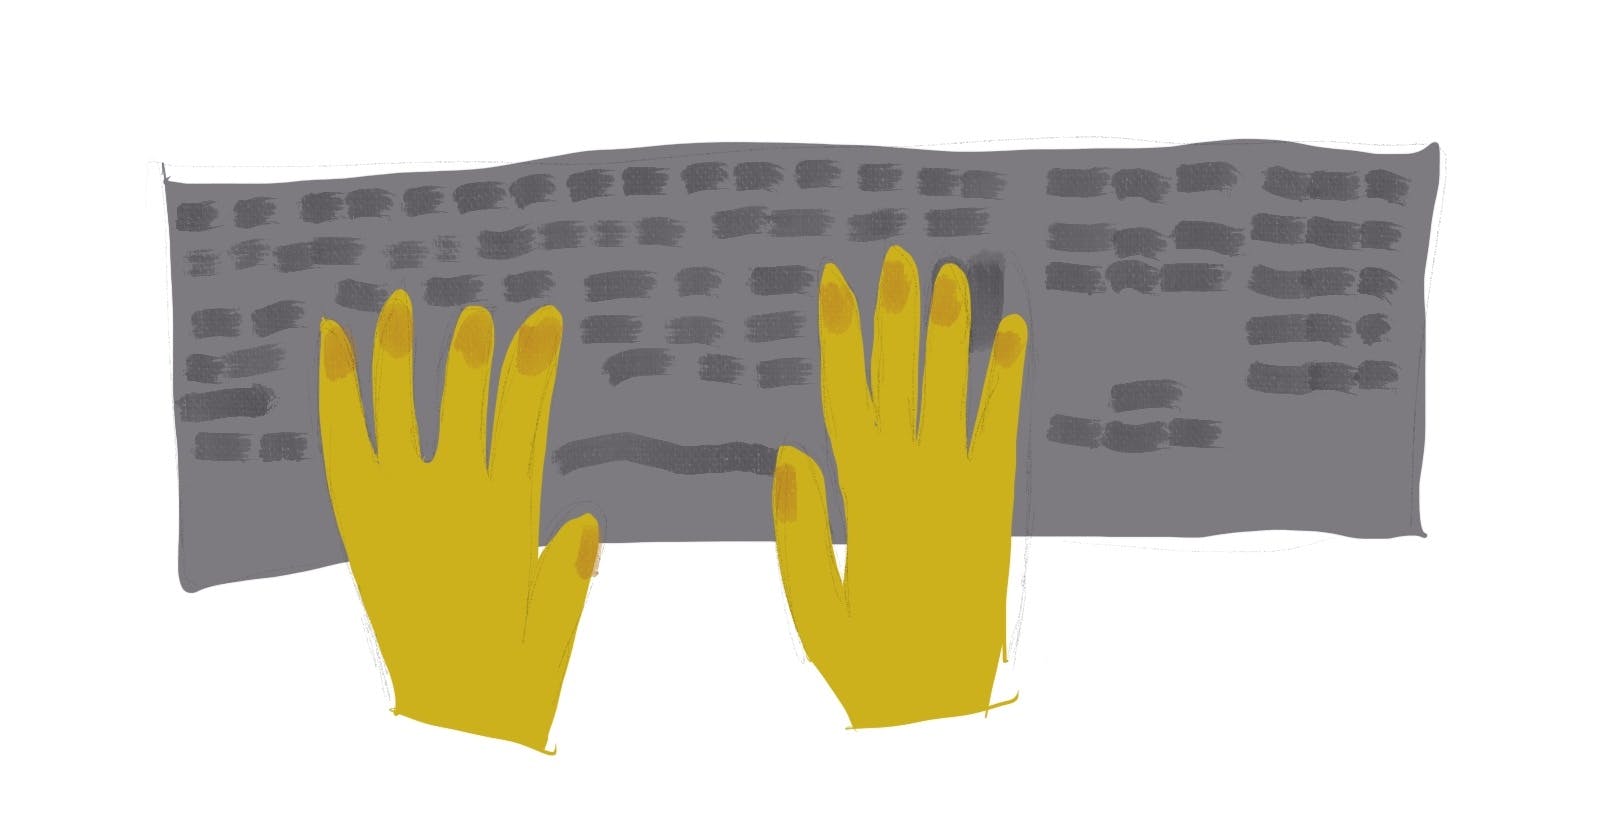 Keyboard let's you use all your fingers